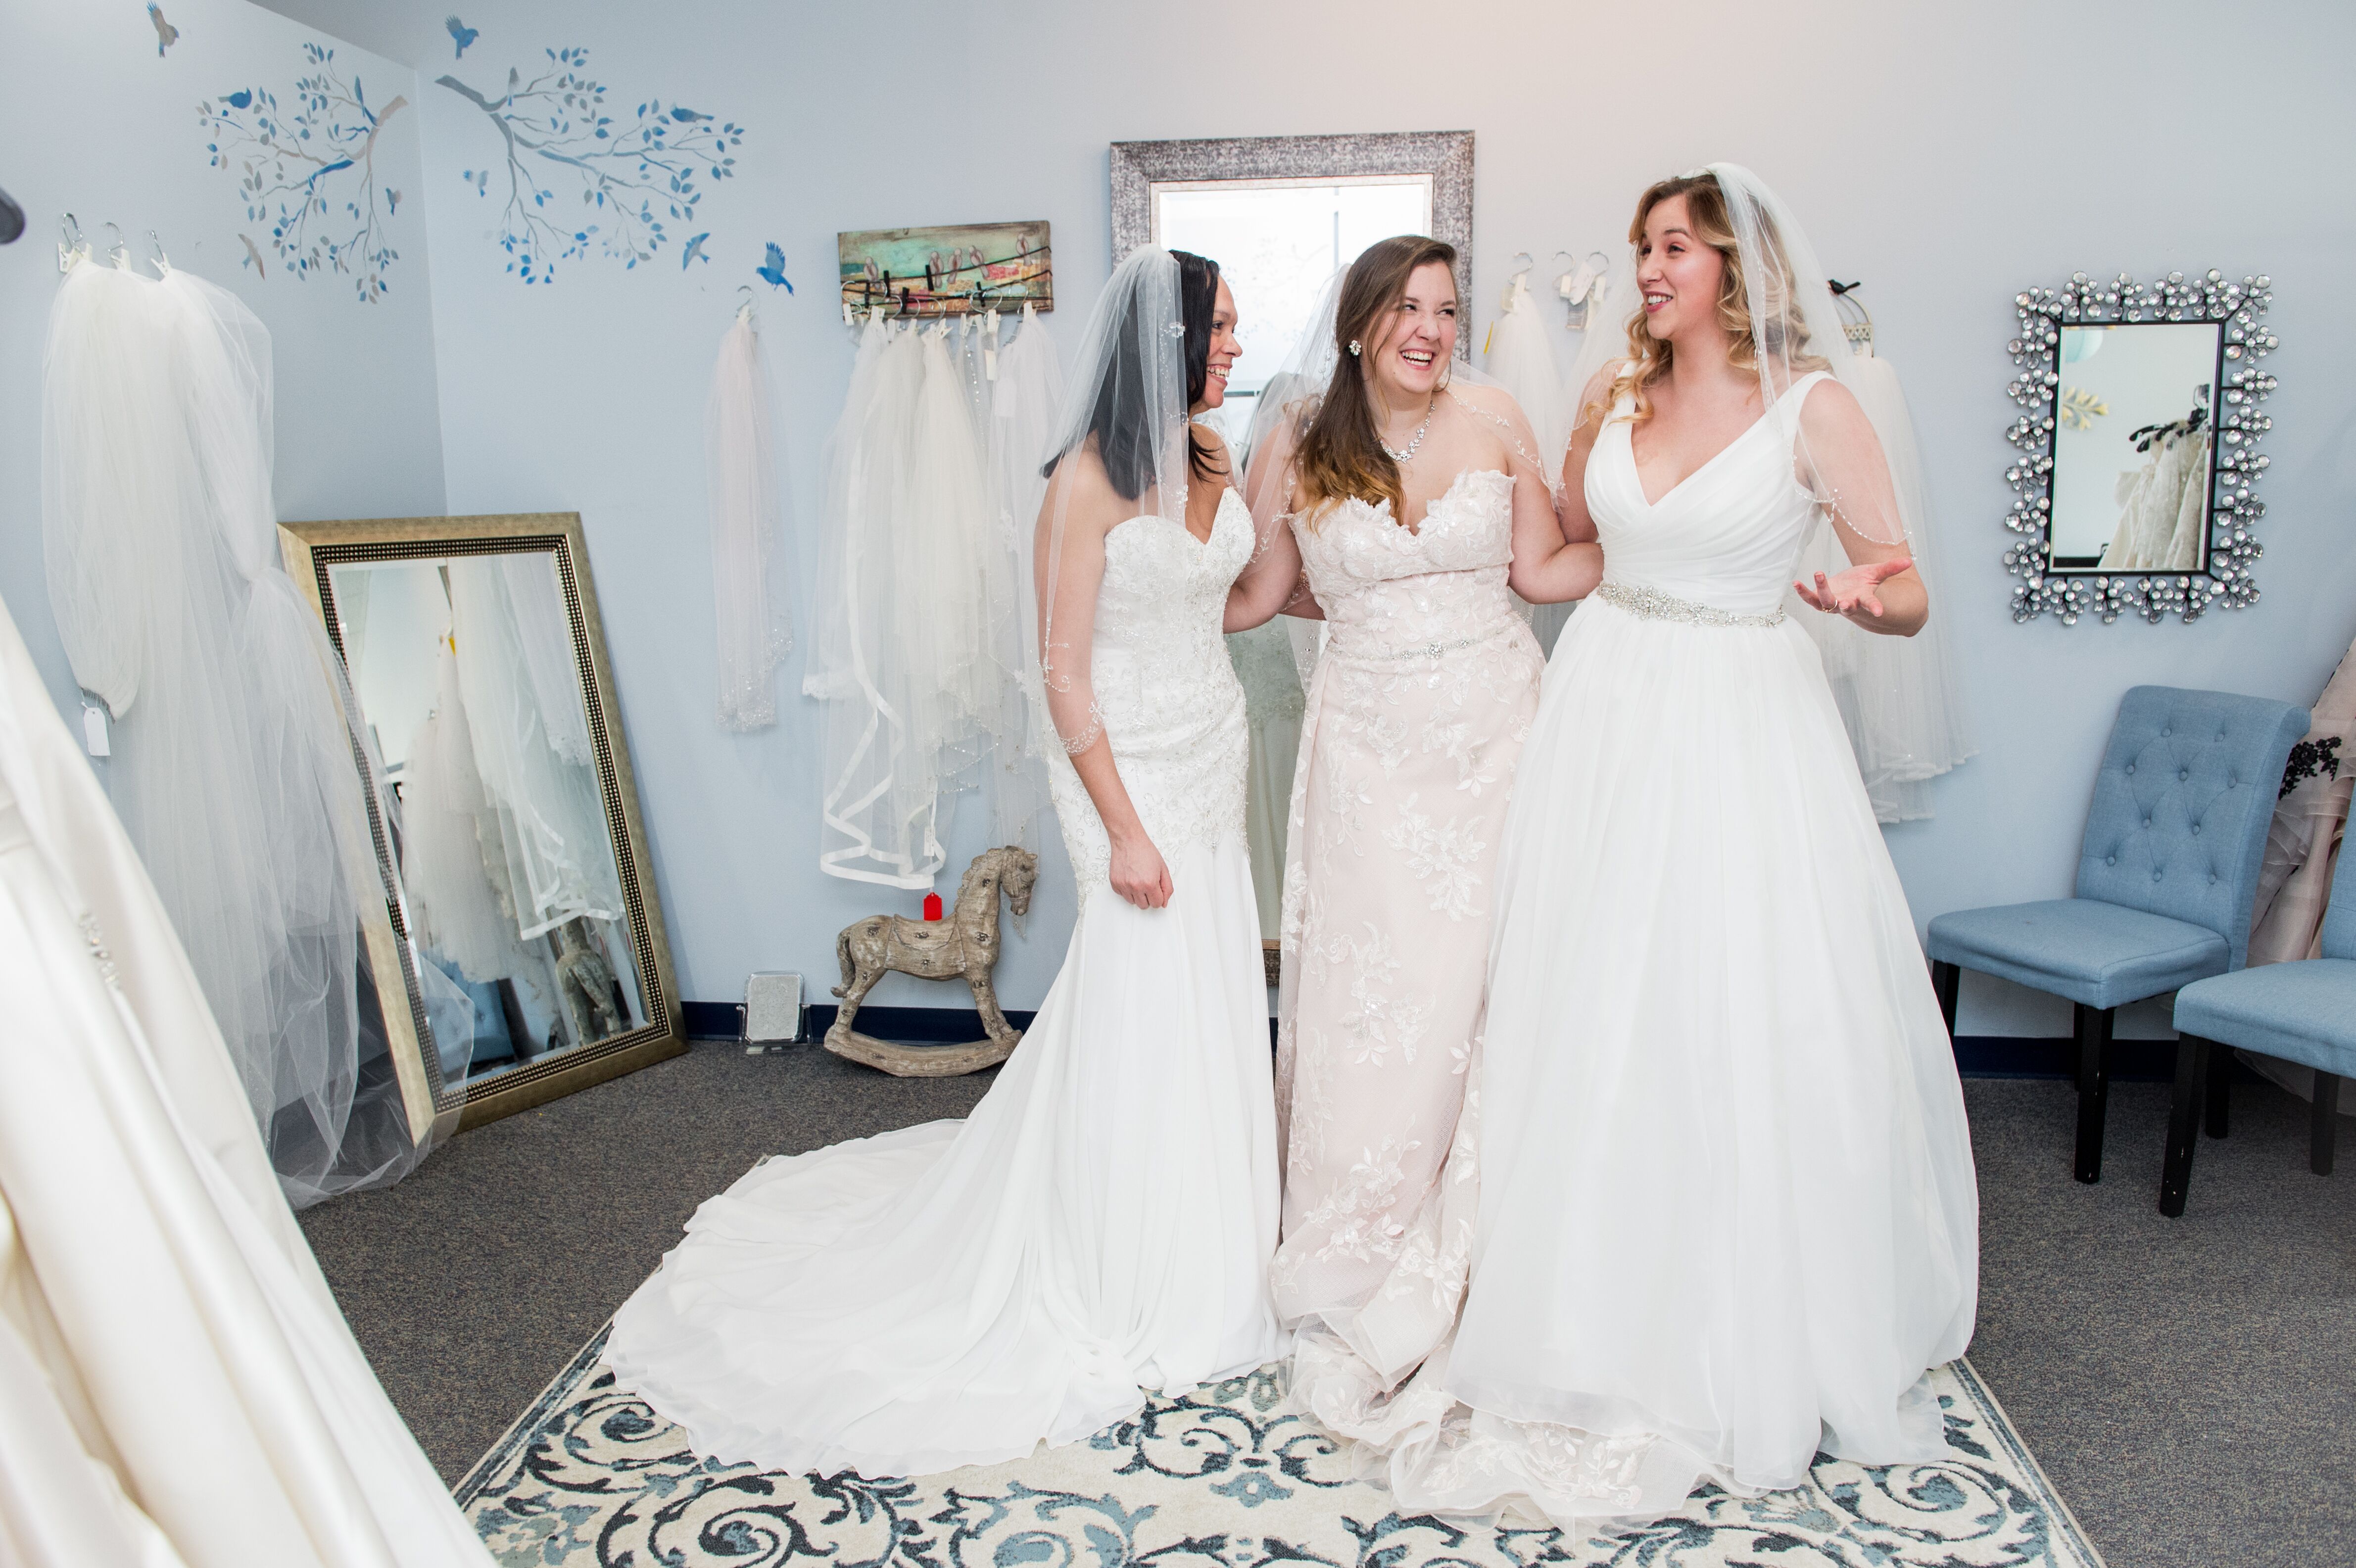 Marianne's Bridal Outlet - Dress & Attire - Westborough, MA